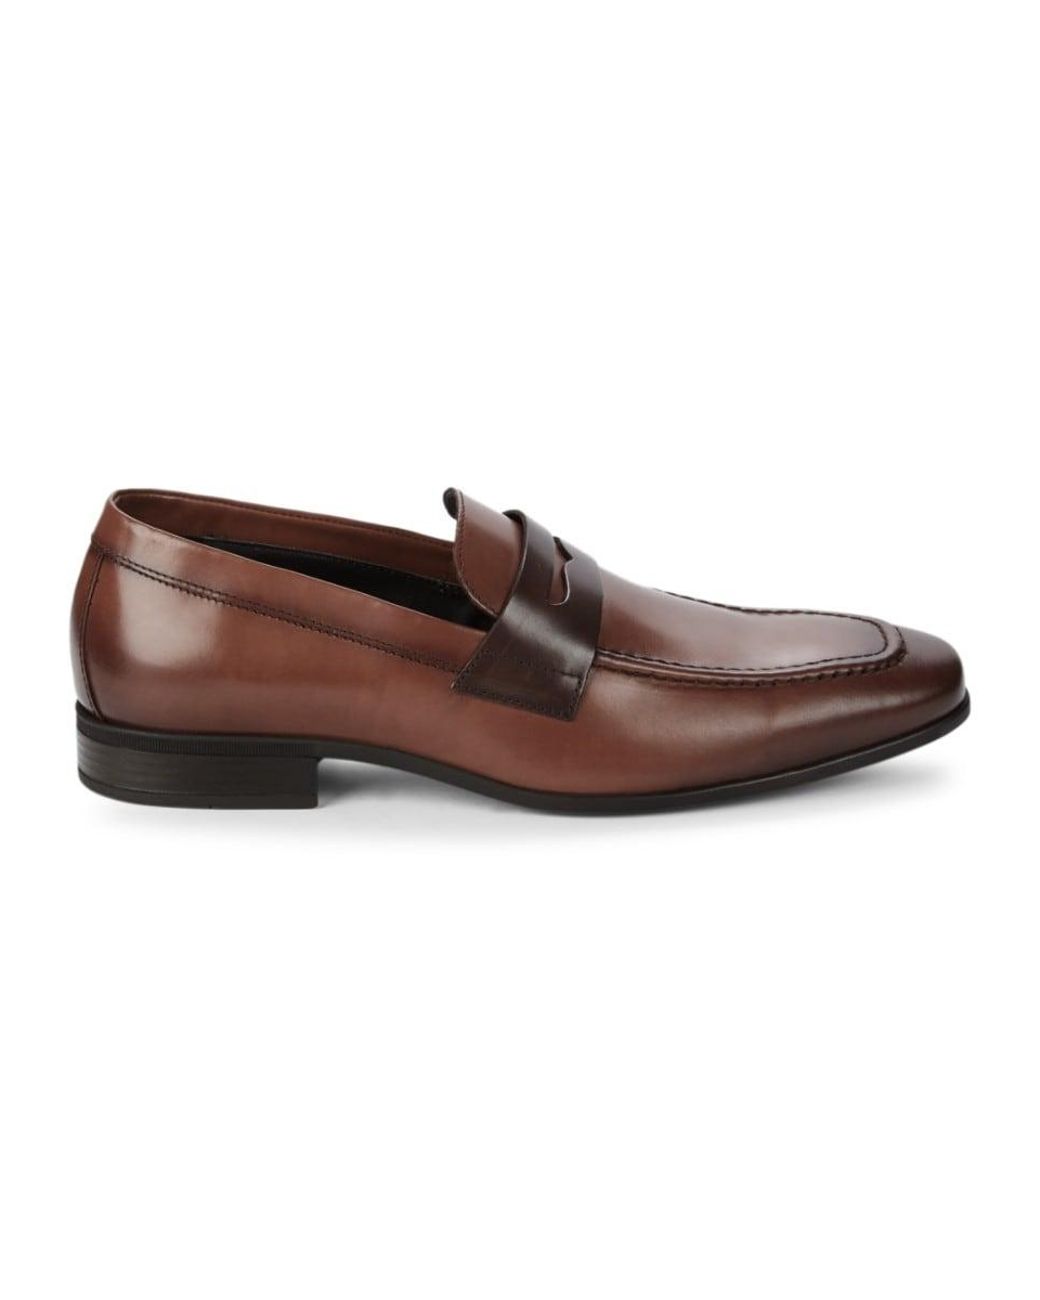 Bruno Magli Men's Mineo Leather Penny Loafers - Cognac - Size 7 in ...